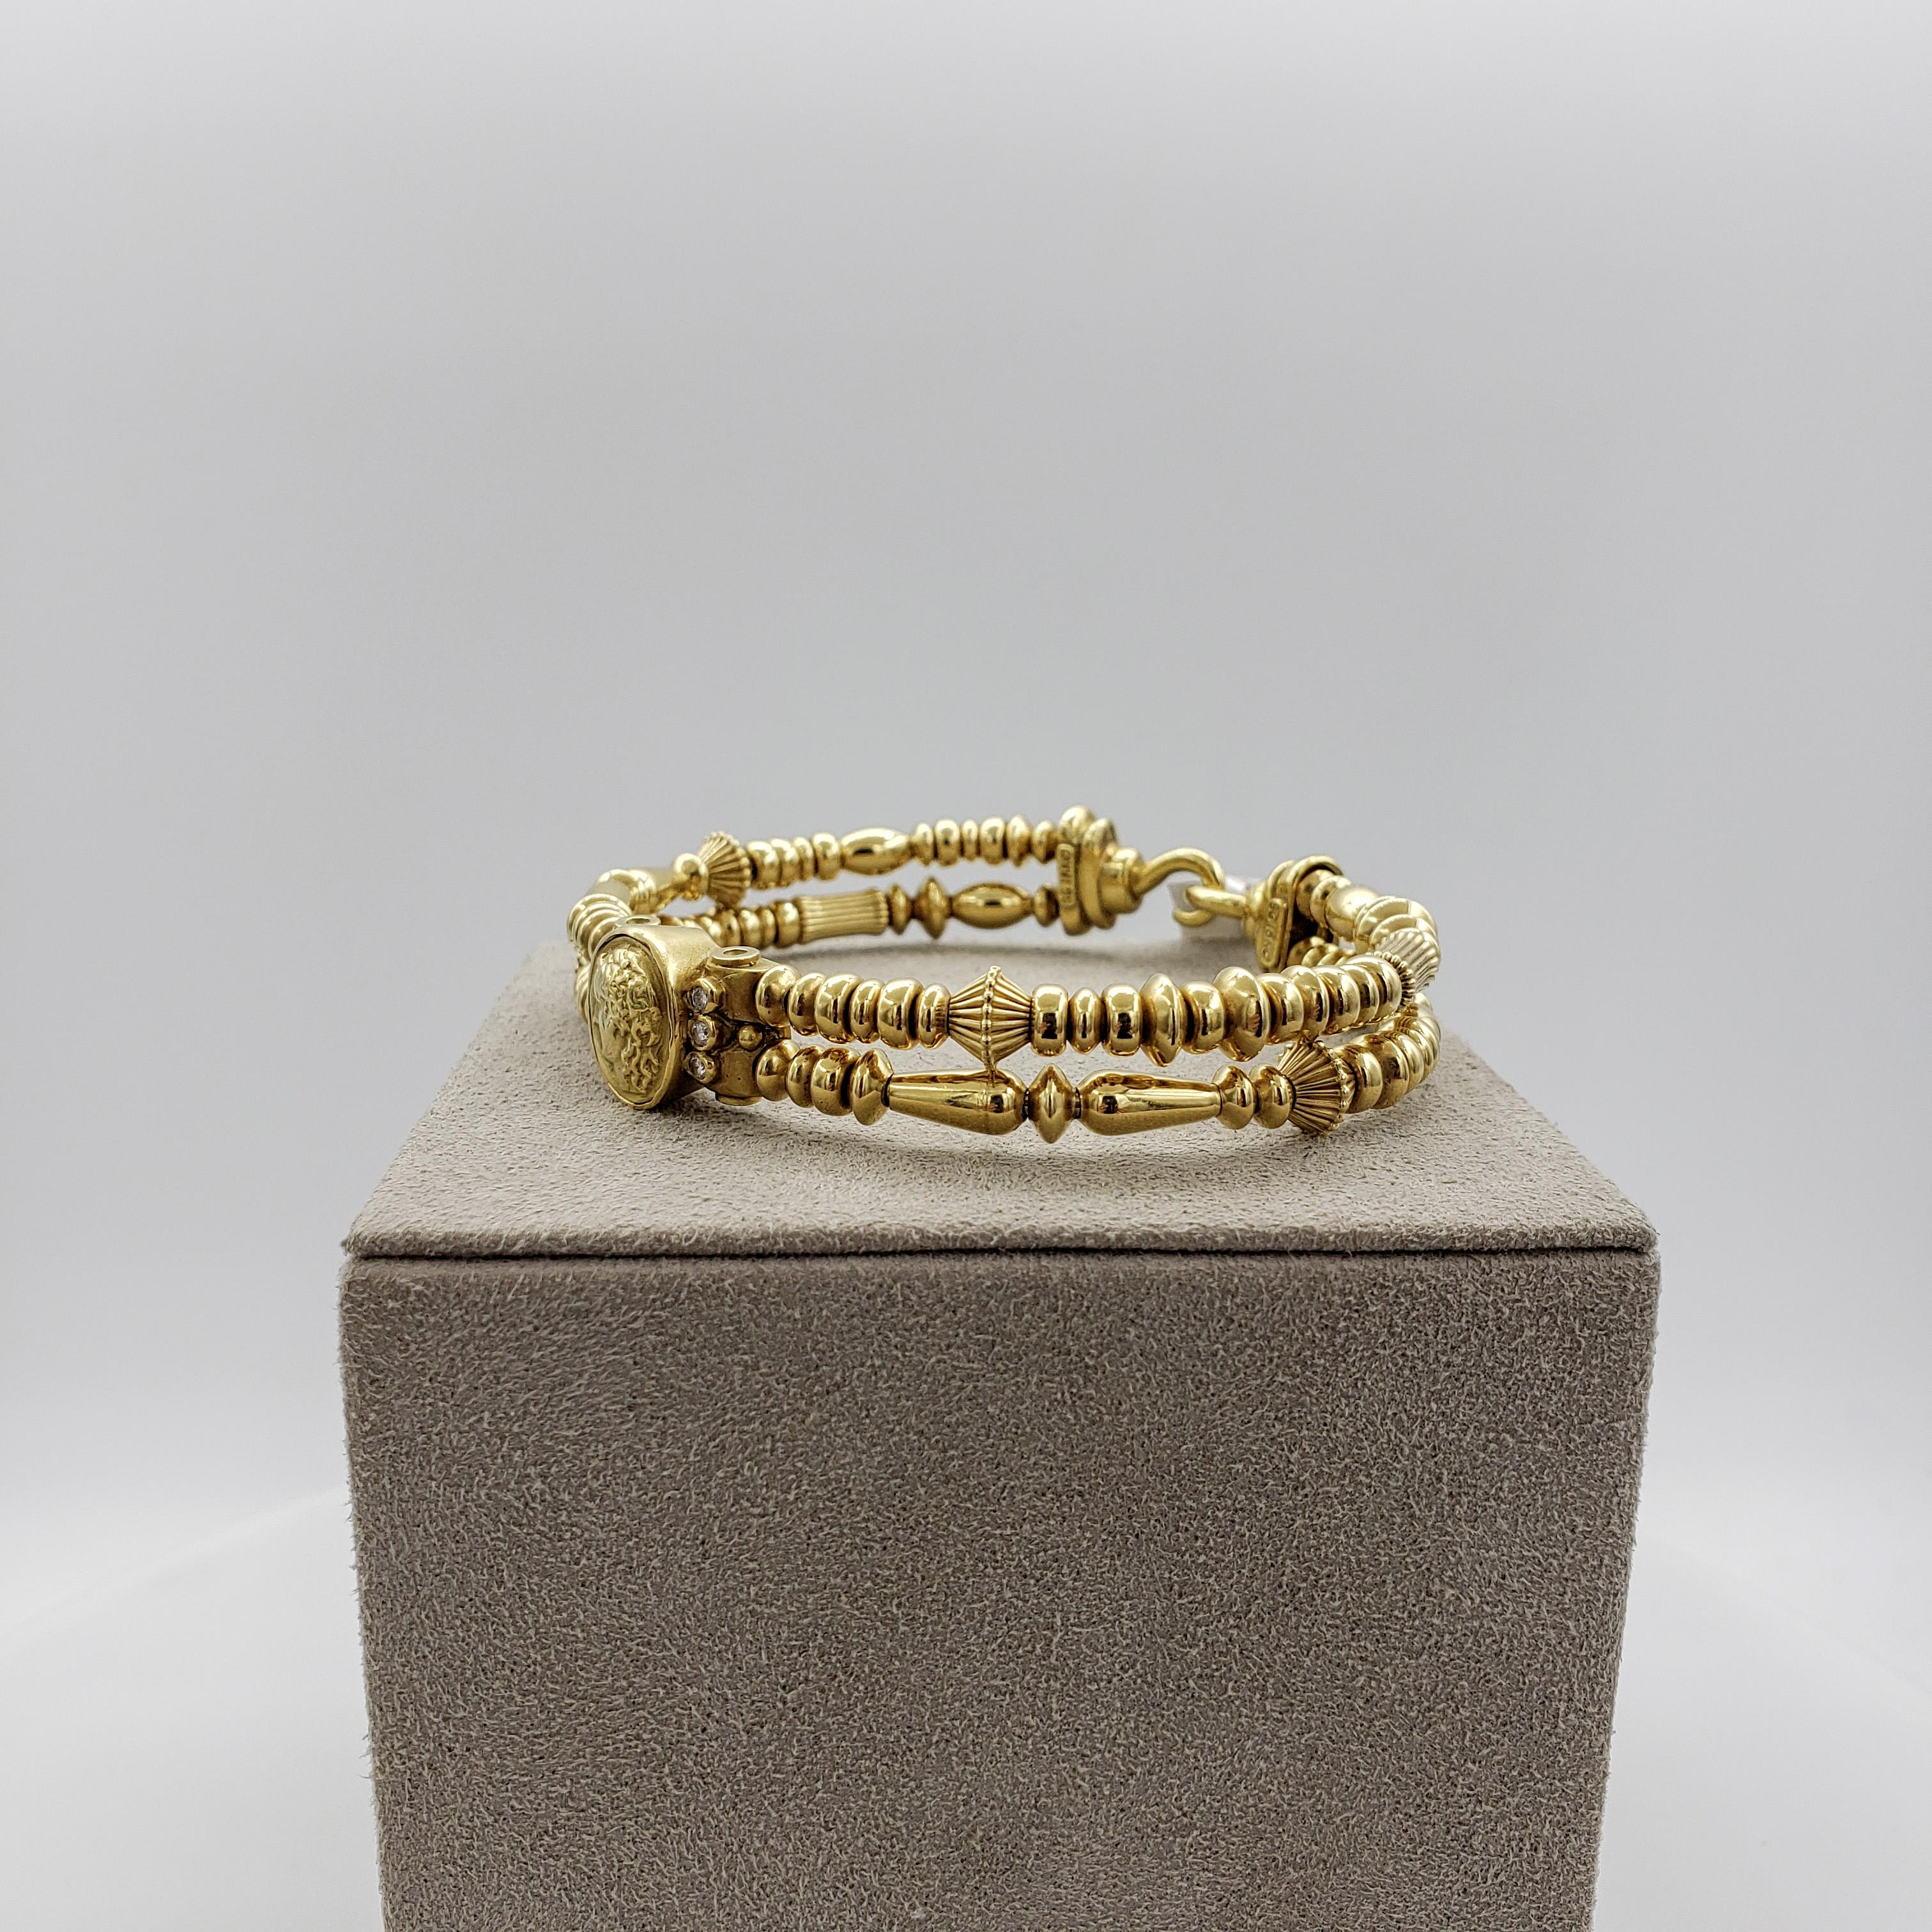 Seidengang Roman Portrait 0.12 Carat Diamond Yellow Gold Retro Bracelet In Excellent Condition For Sale In New York, NY